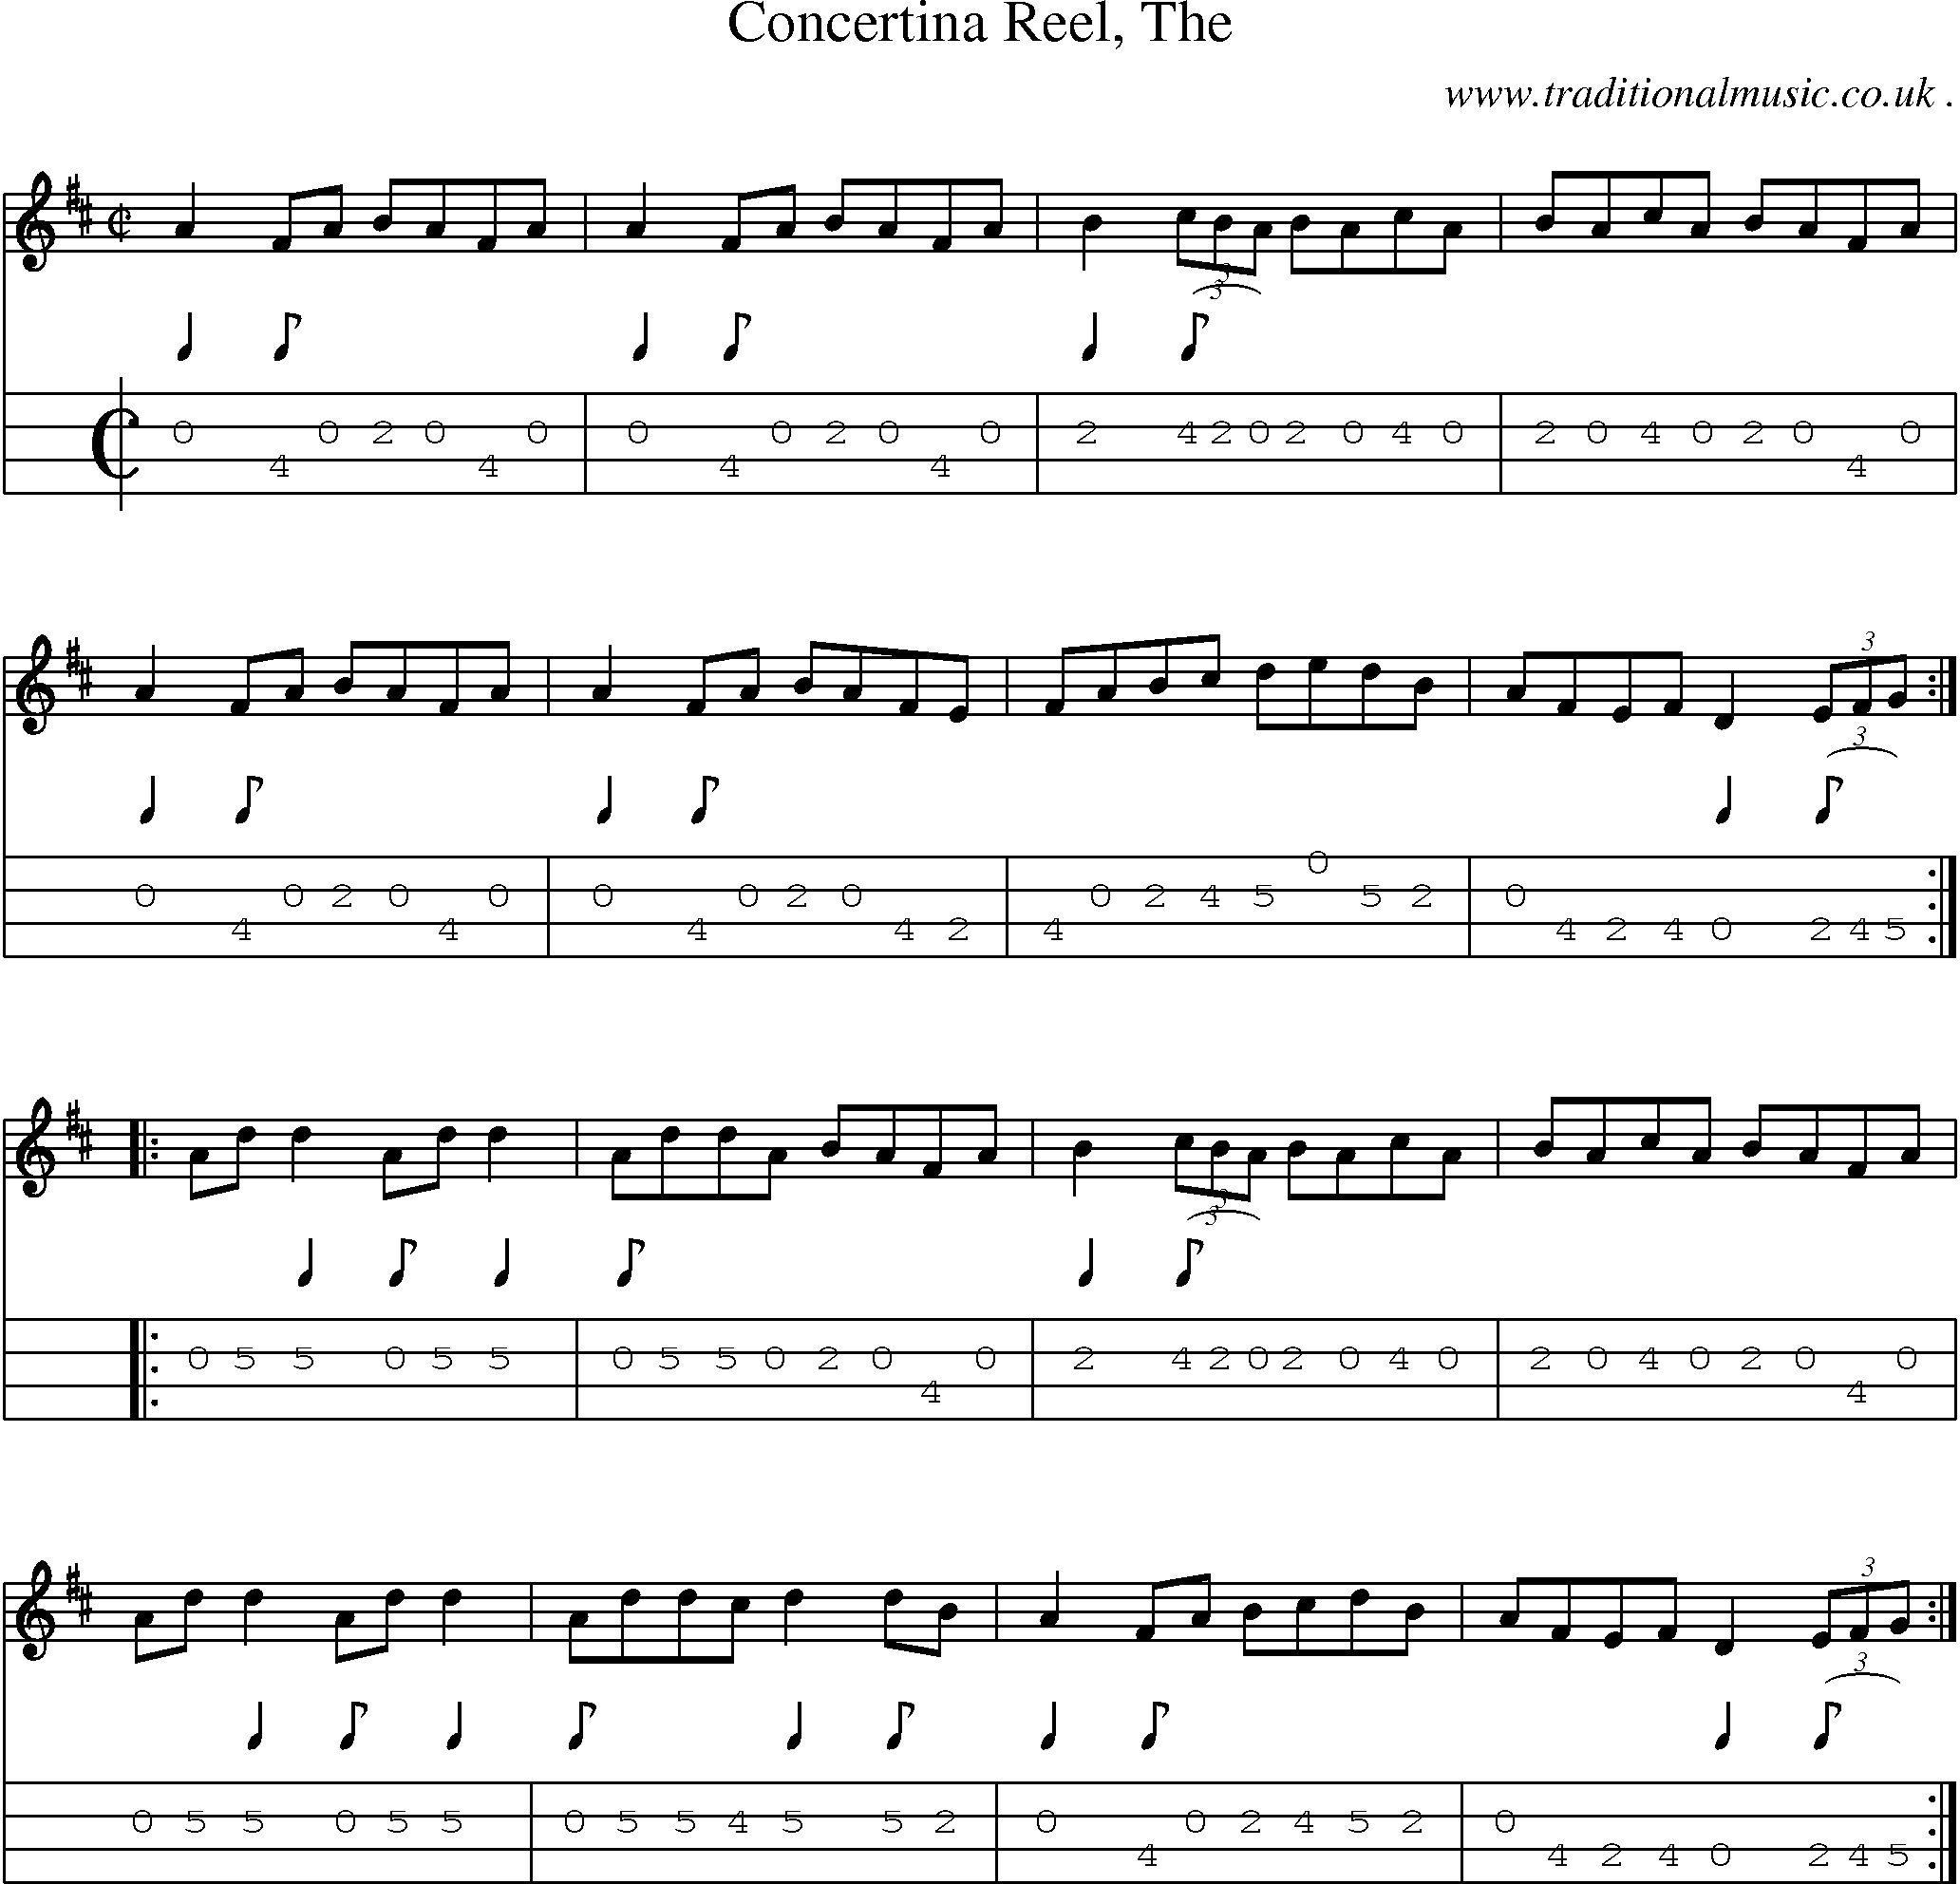 Music Score and Mandolin Tabs for Concertina Reel The